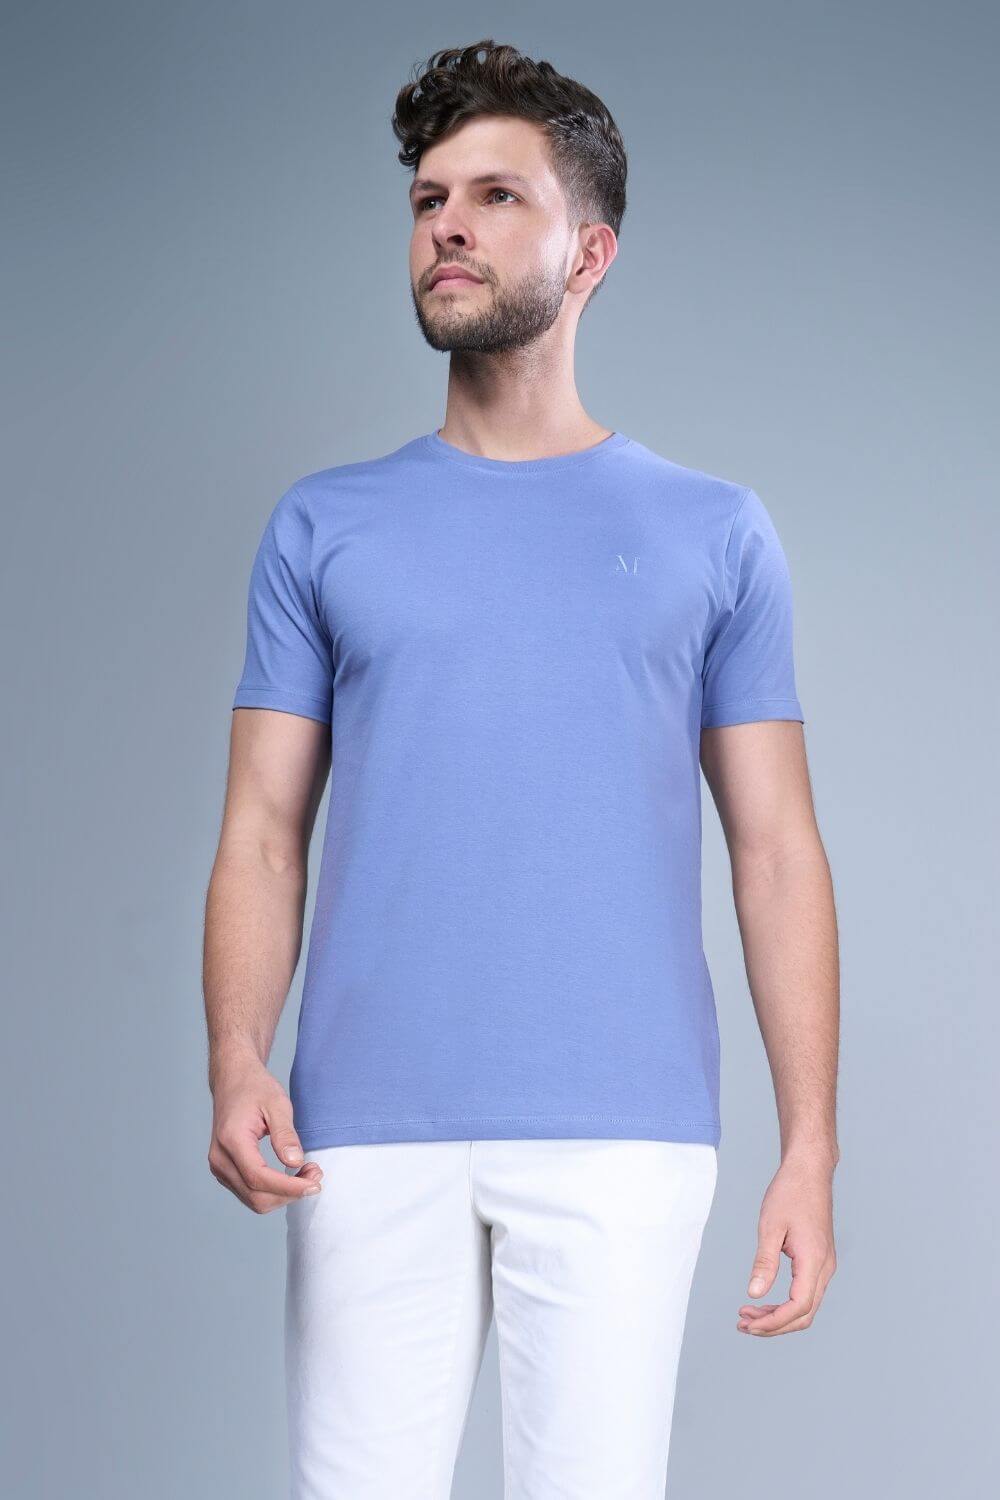 Blue colored, cotton solid T shirt for men with half sleeves and round neck from vibgyor series collection, front view.